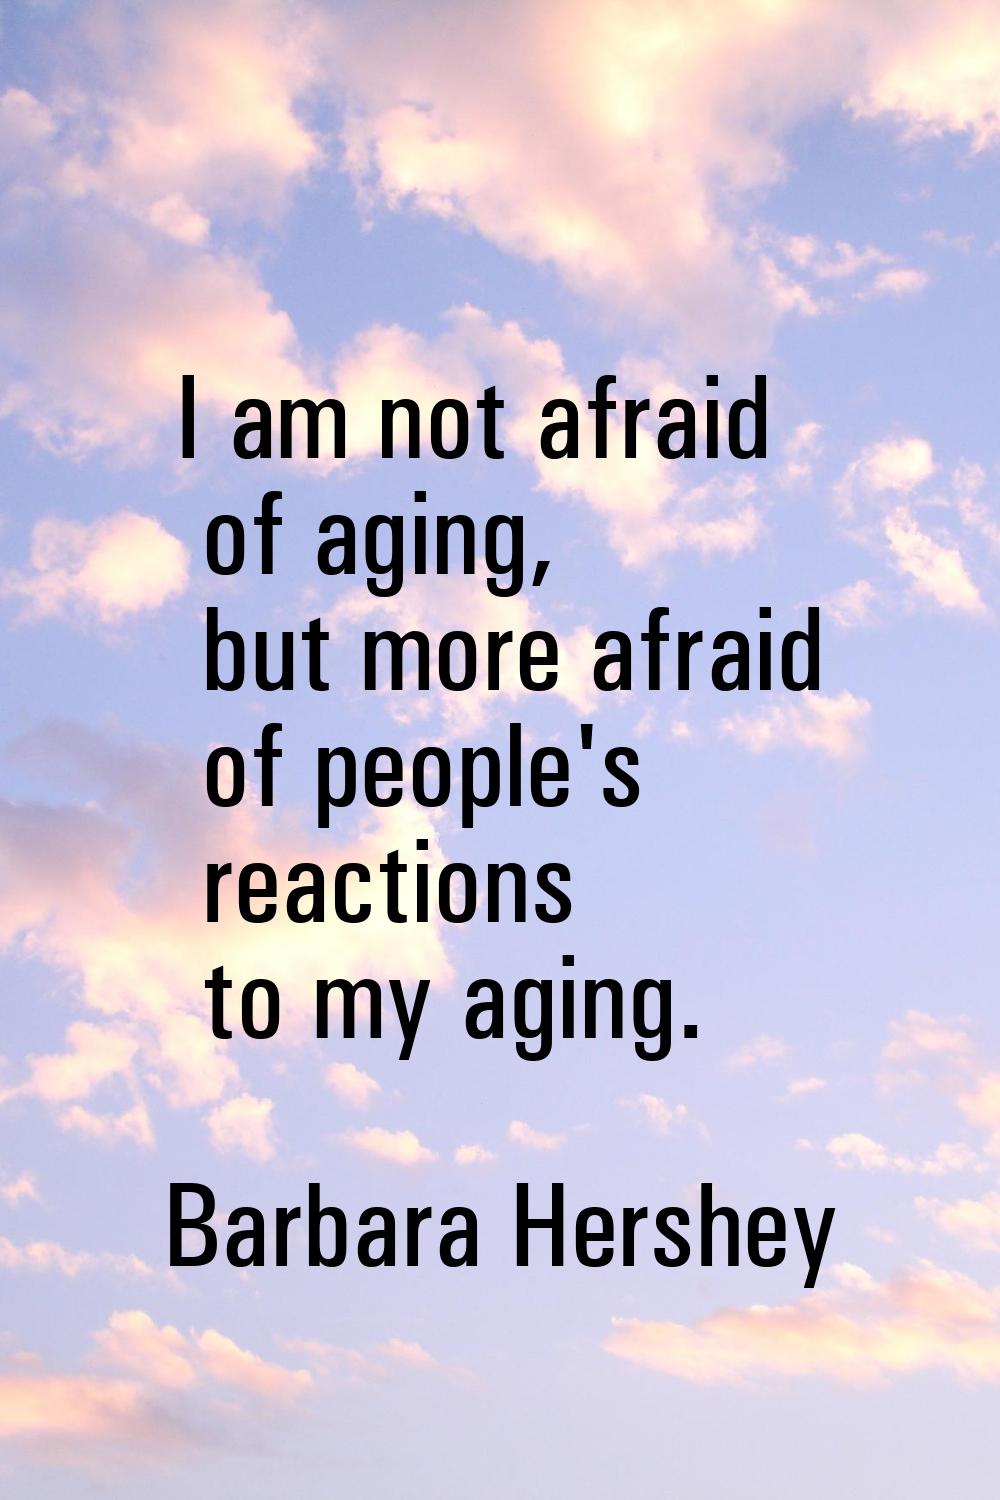 I am not afraid of aging, but more afraid of people's reactions to my aging.